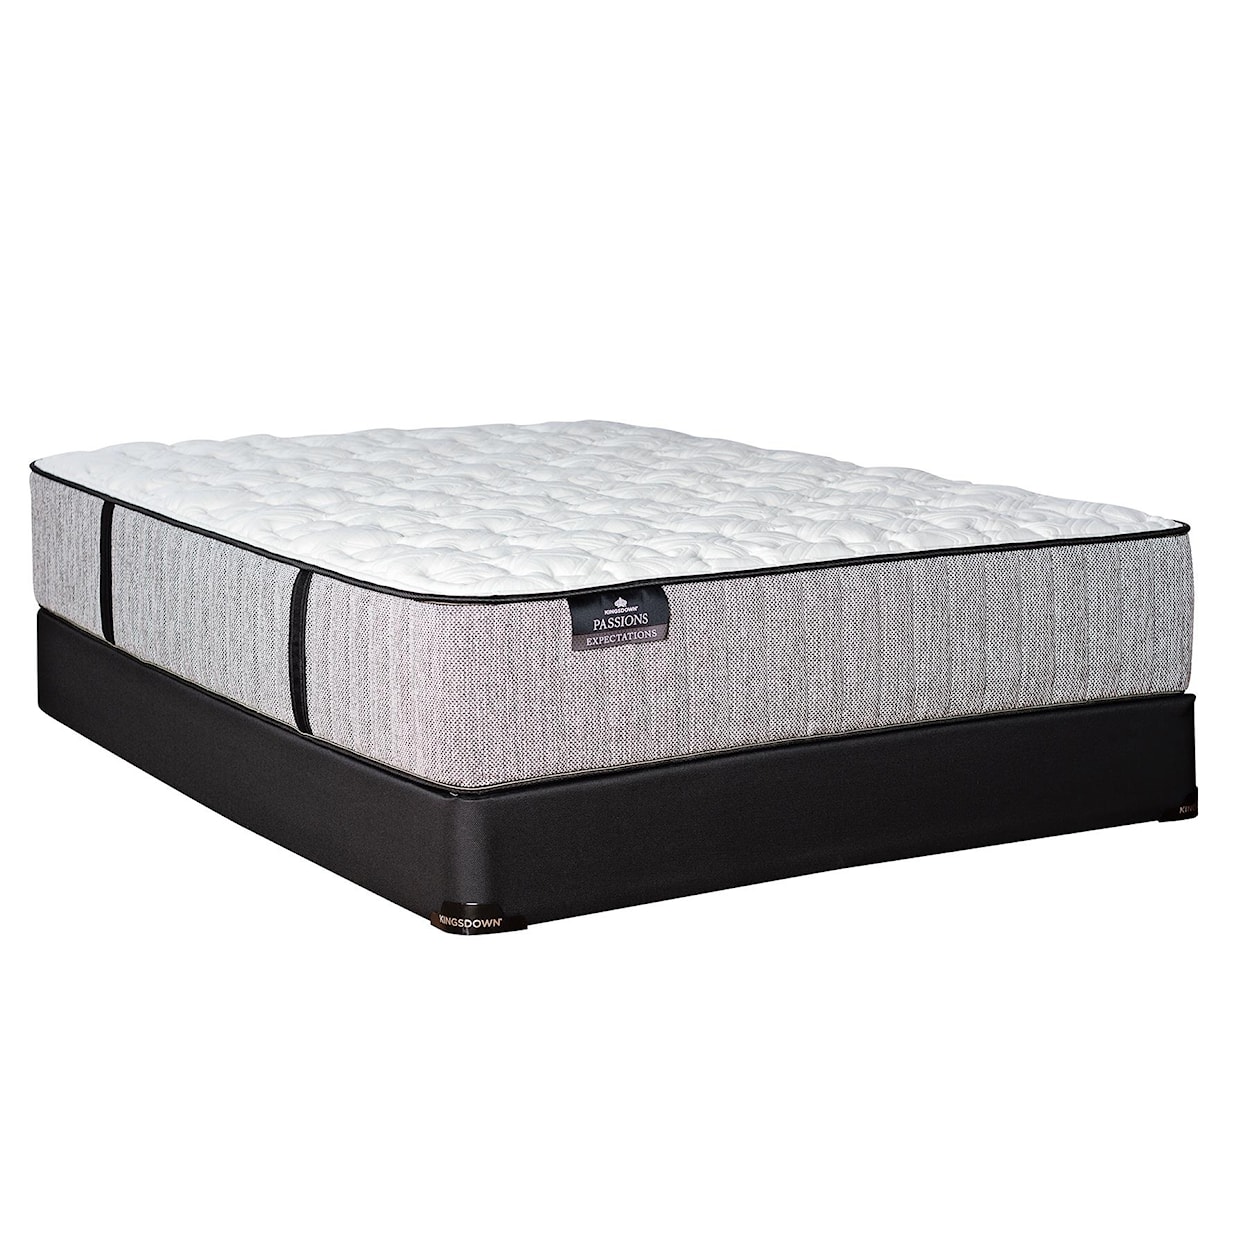 Kingsdown Passions Expectations Queen 13 1/4" Firm Mattress